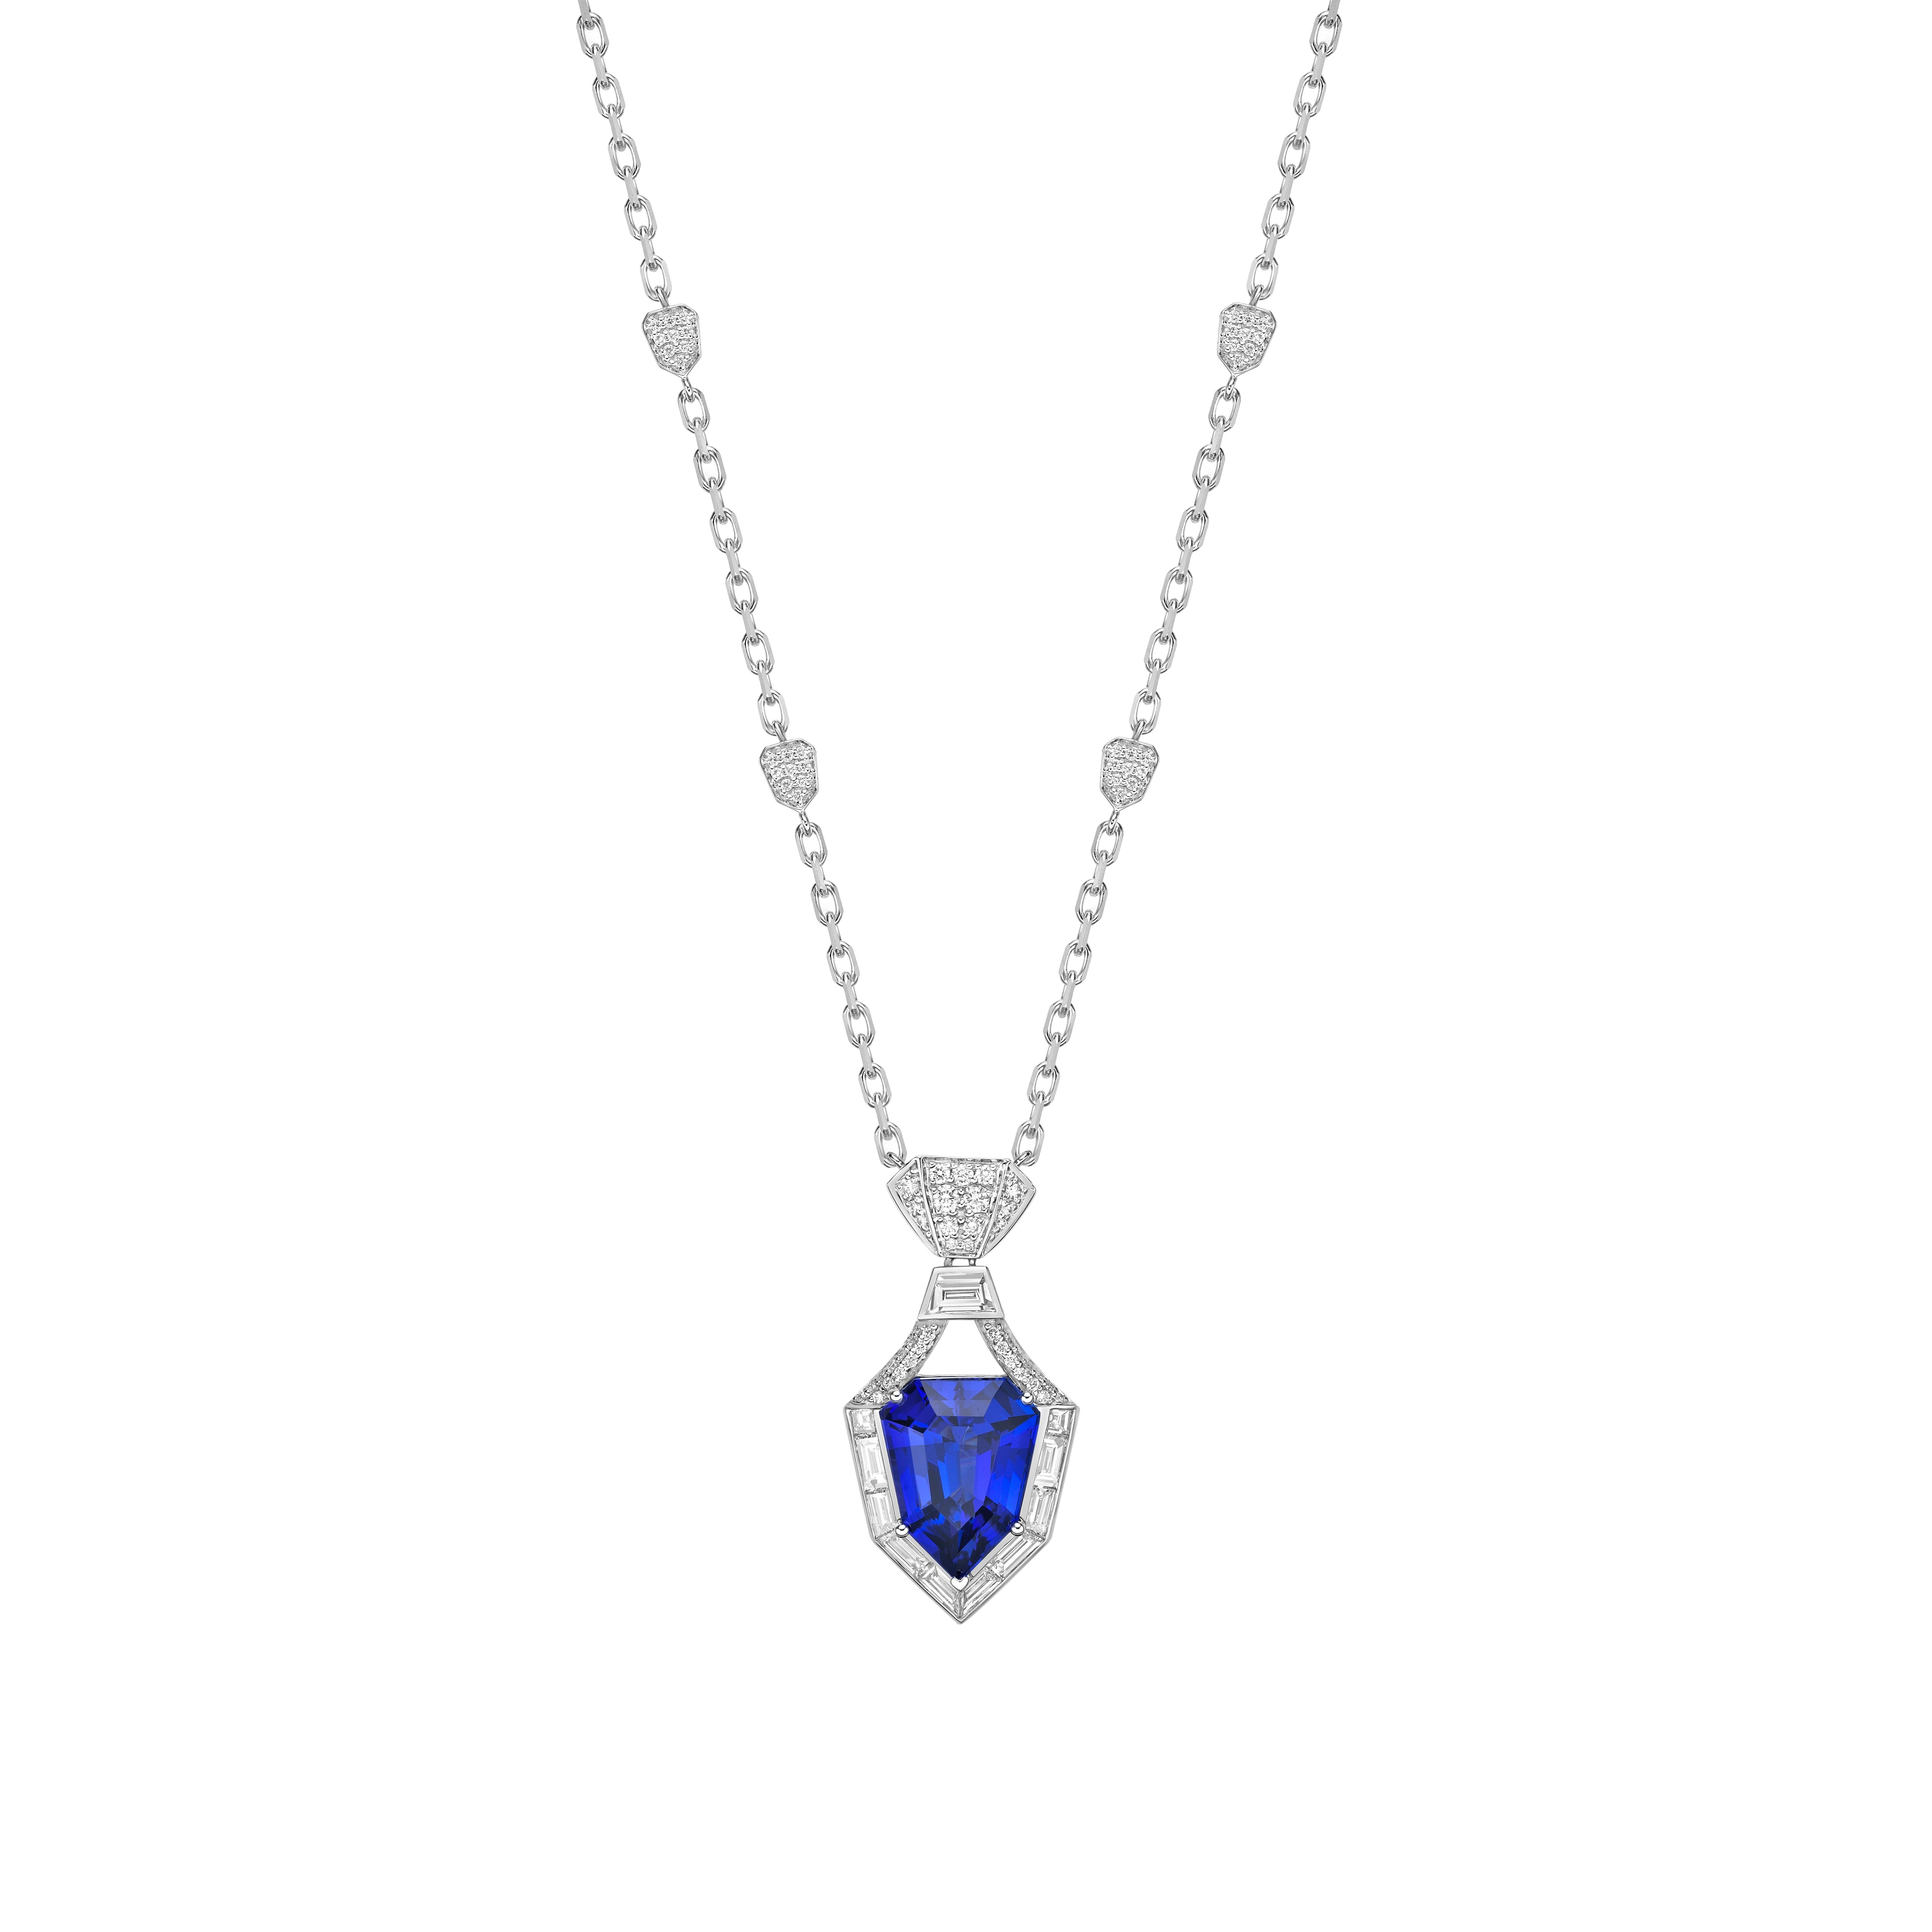 This Tanzanite Jewellery line has high quality beautifully cut Tanzanites. These velvety blue stones are set against an art deco-inspired frame of diamond baguettes.

Tanzanite Pendant in 18Karat White Gold with Diamond.

Tanzanite: 8.57 carat,